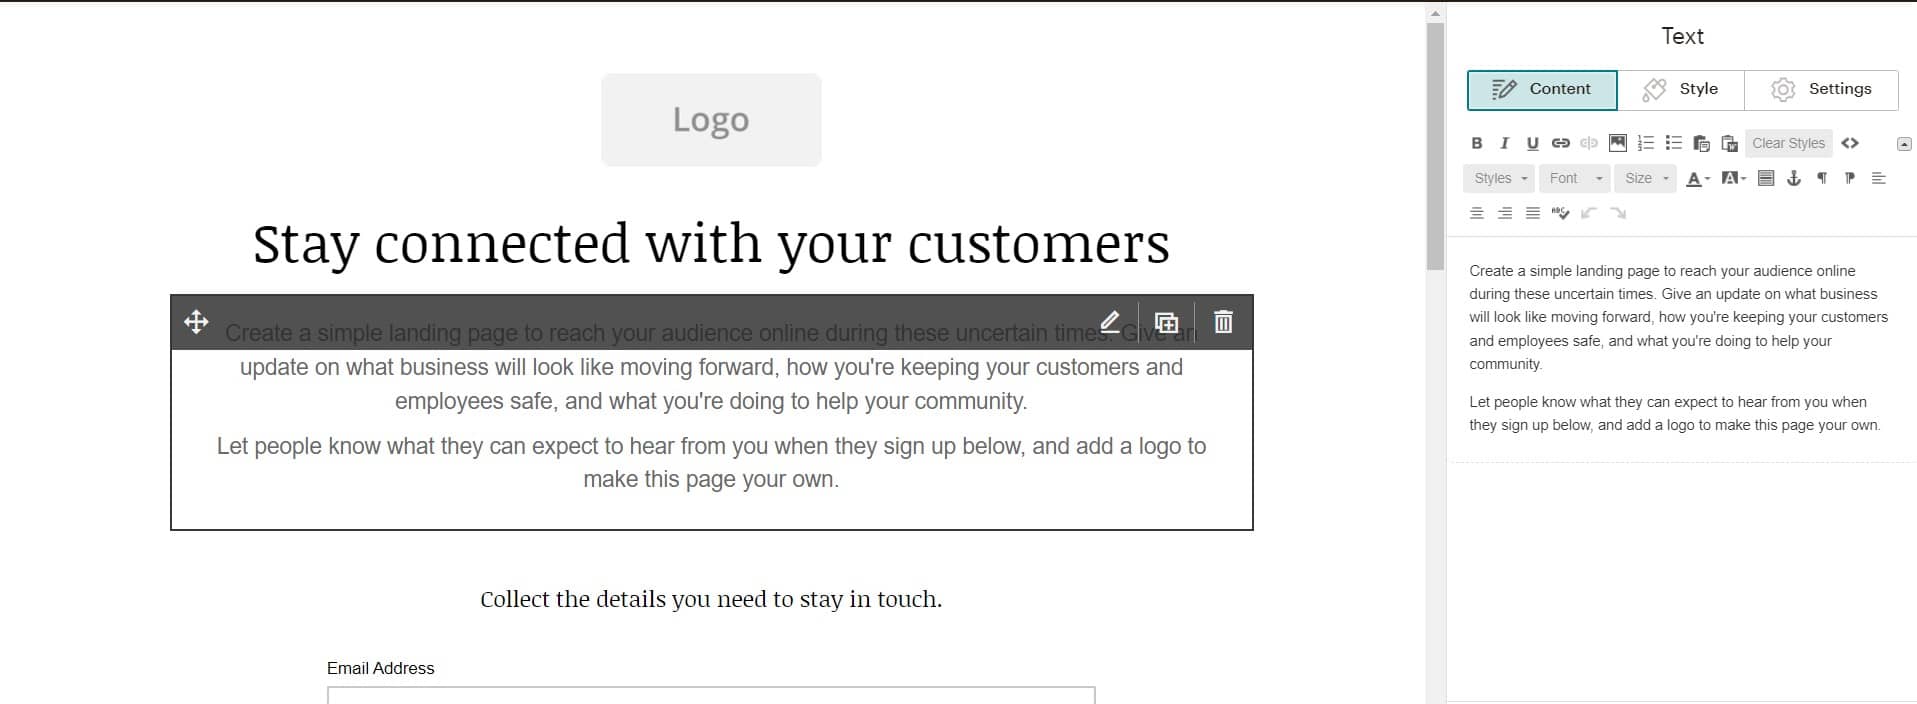 How to create a landing page in Mailchimp - editing text block